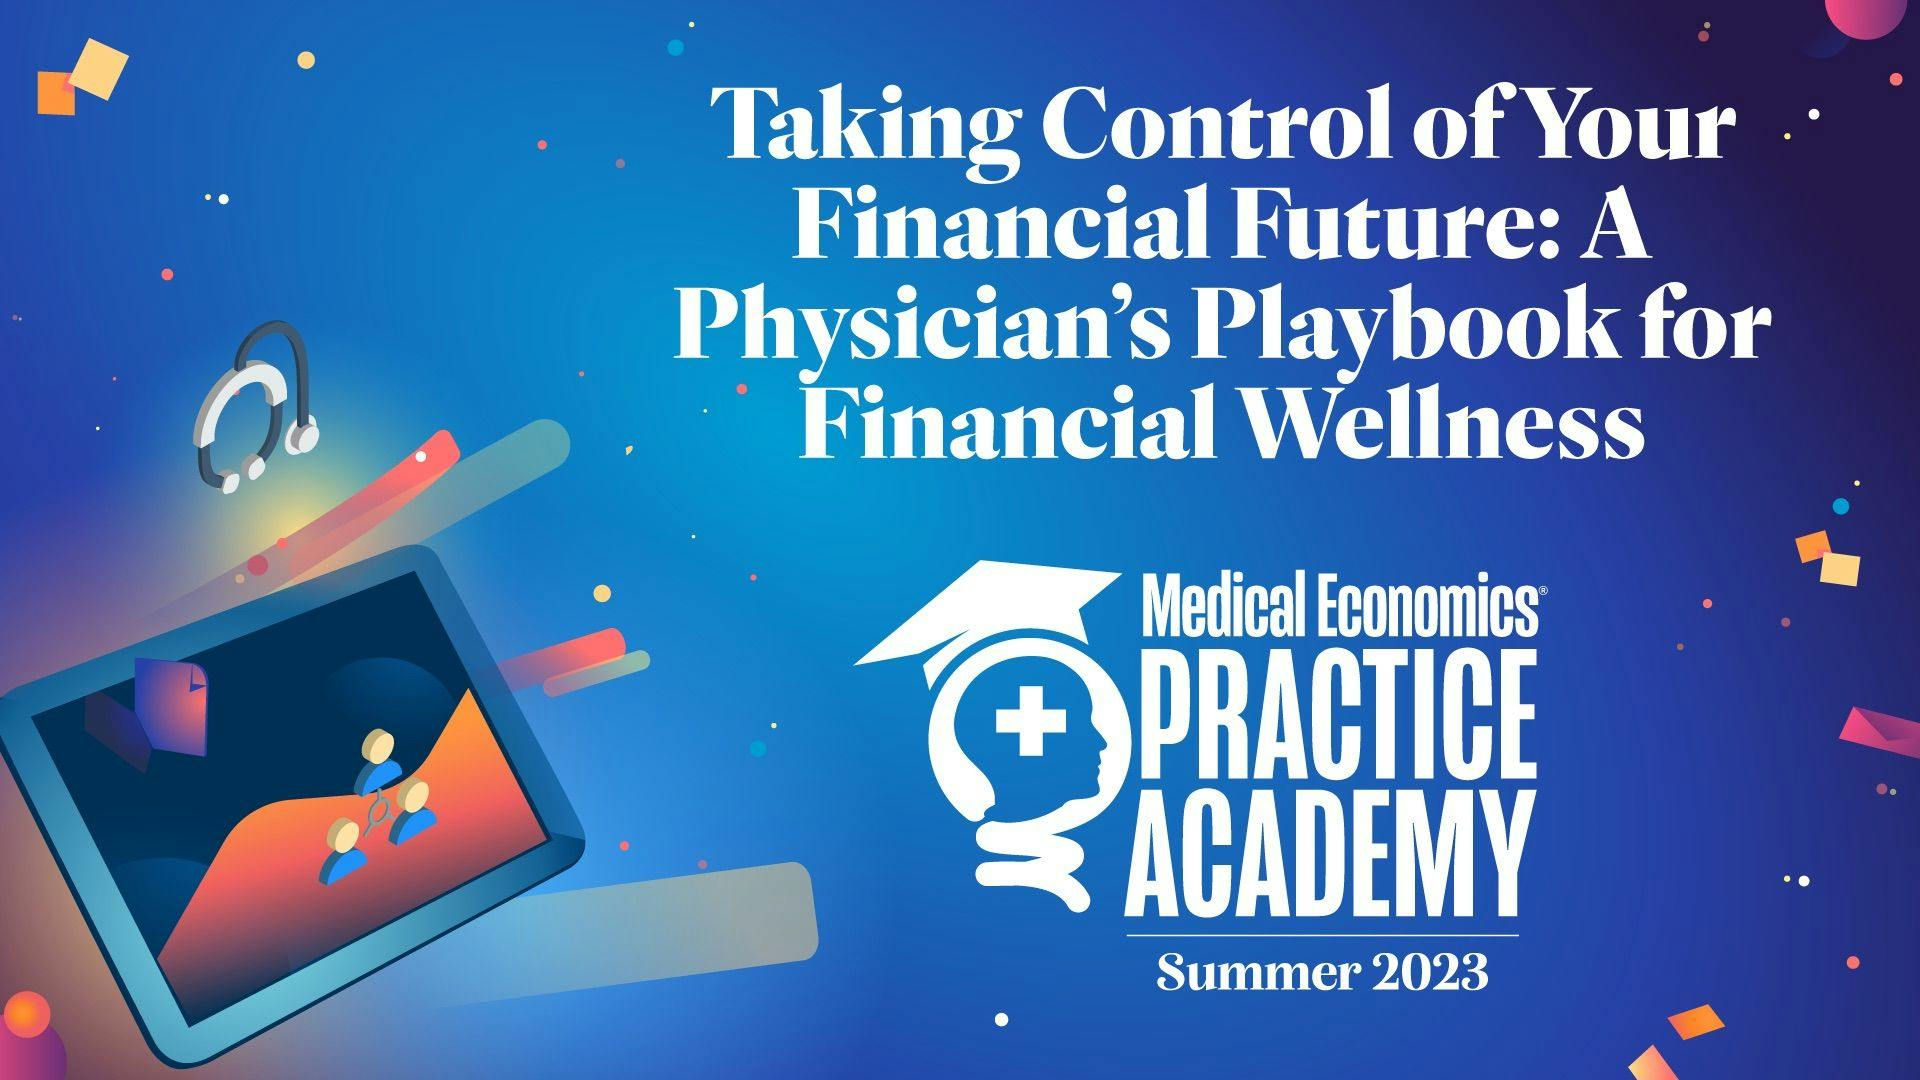 Take control of your financial future: ©MJH Life Sciences